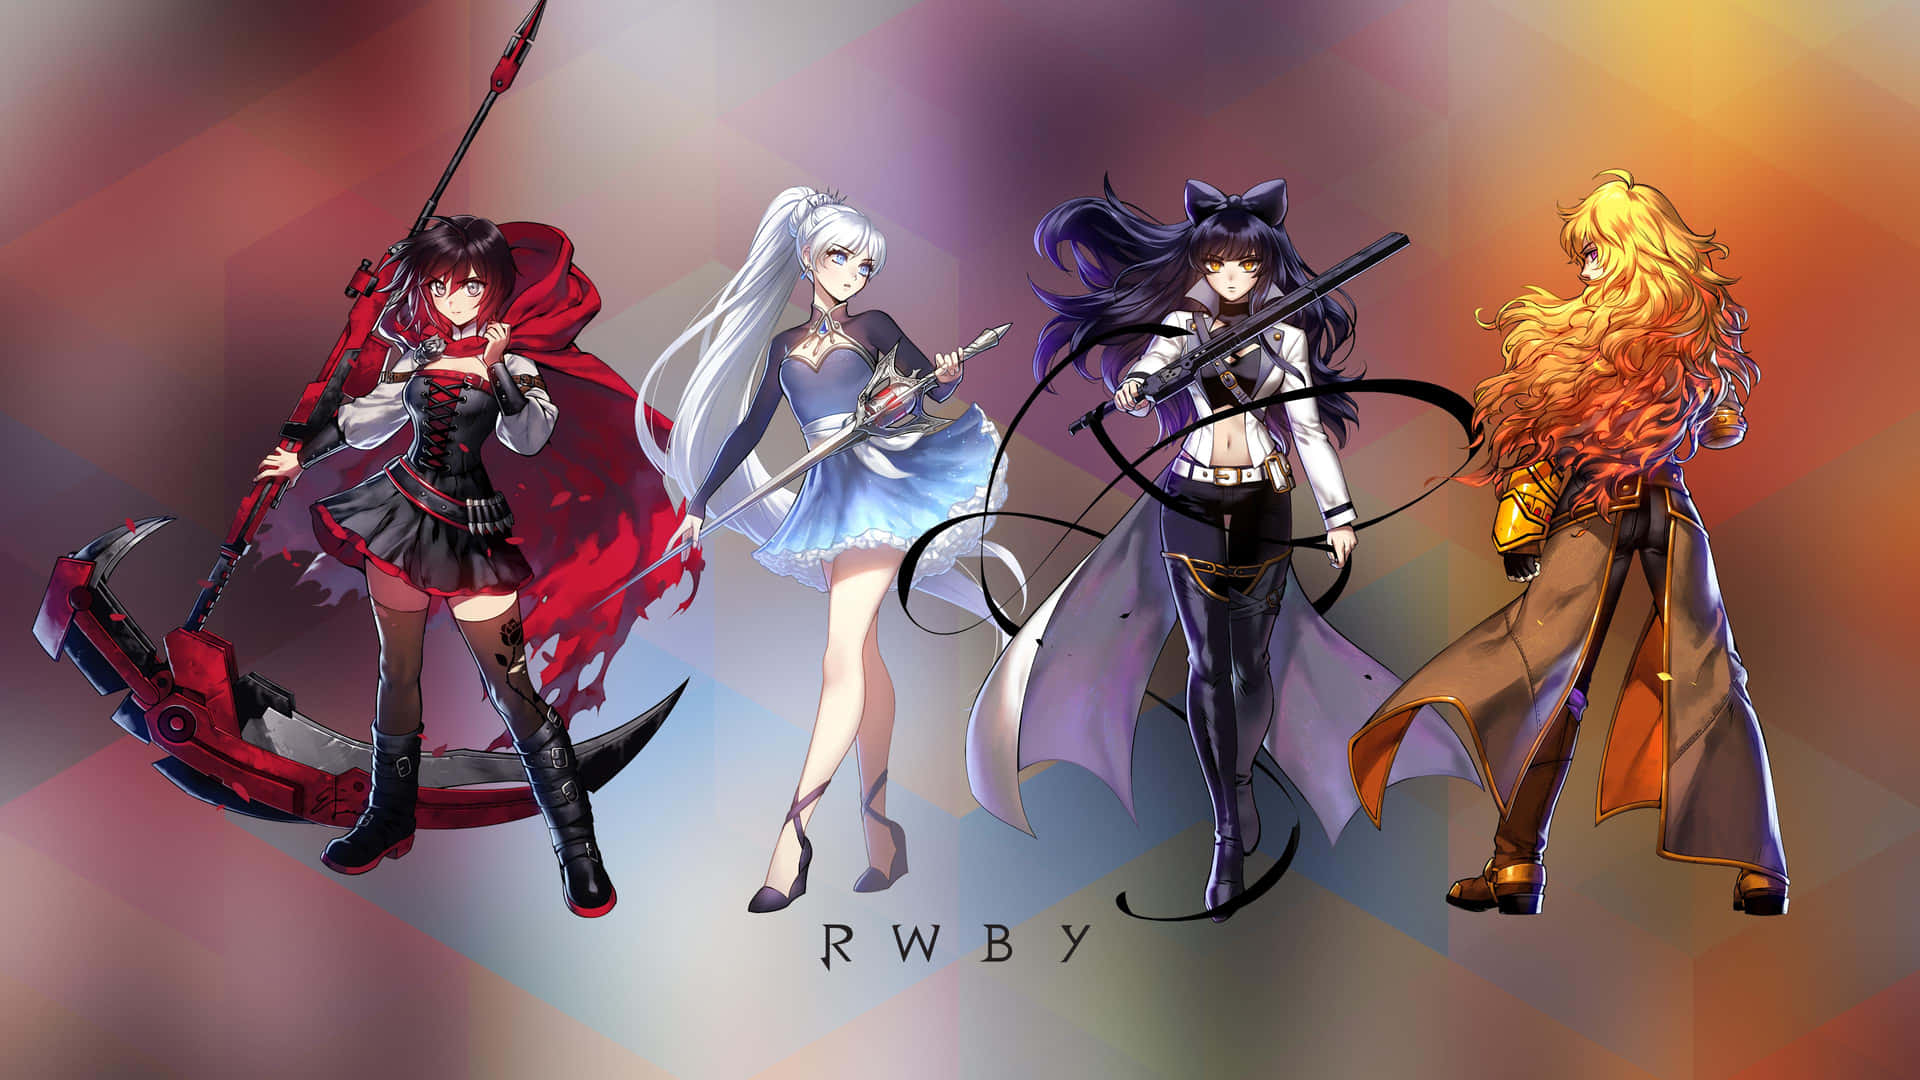 Join Team RWBY and Experience Their Epic Adventures